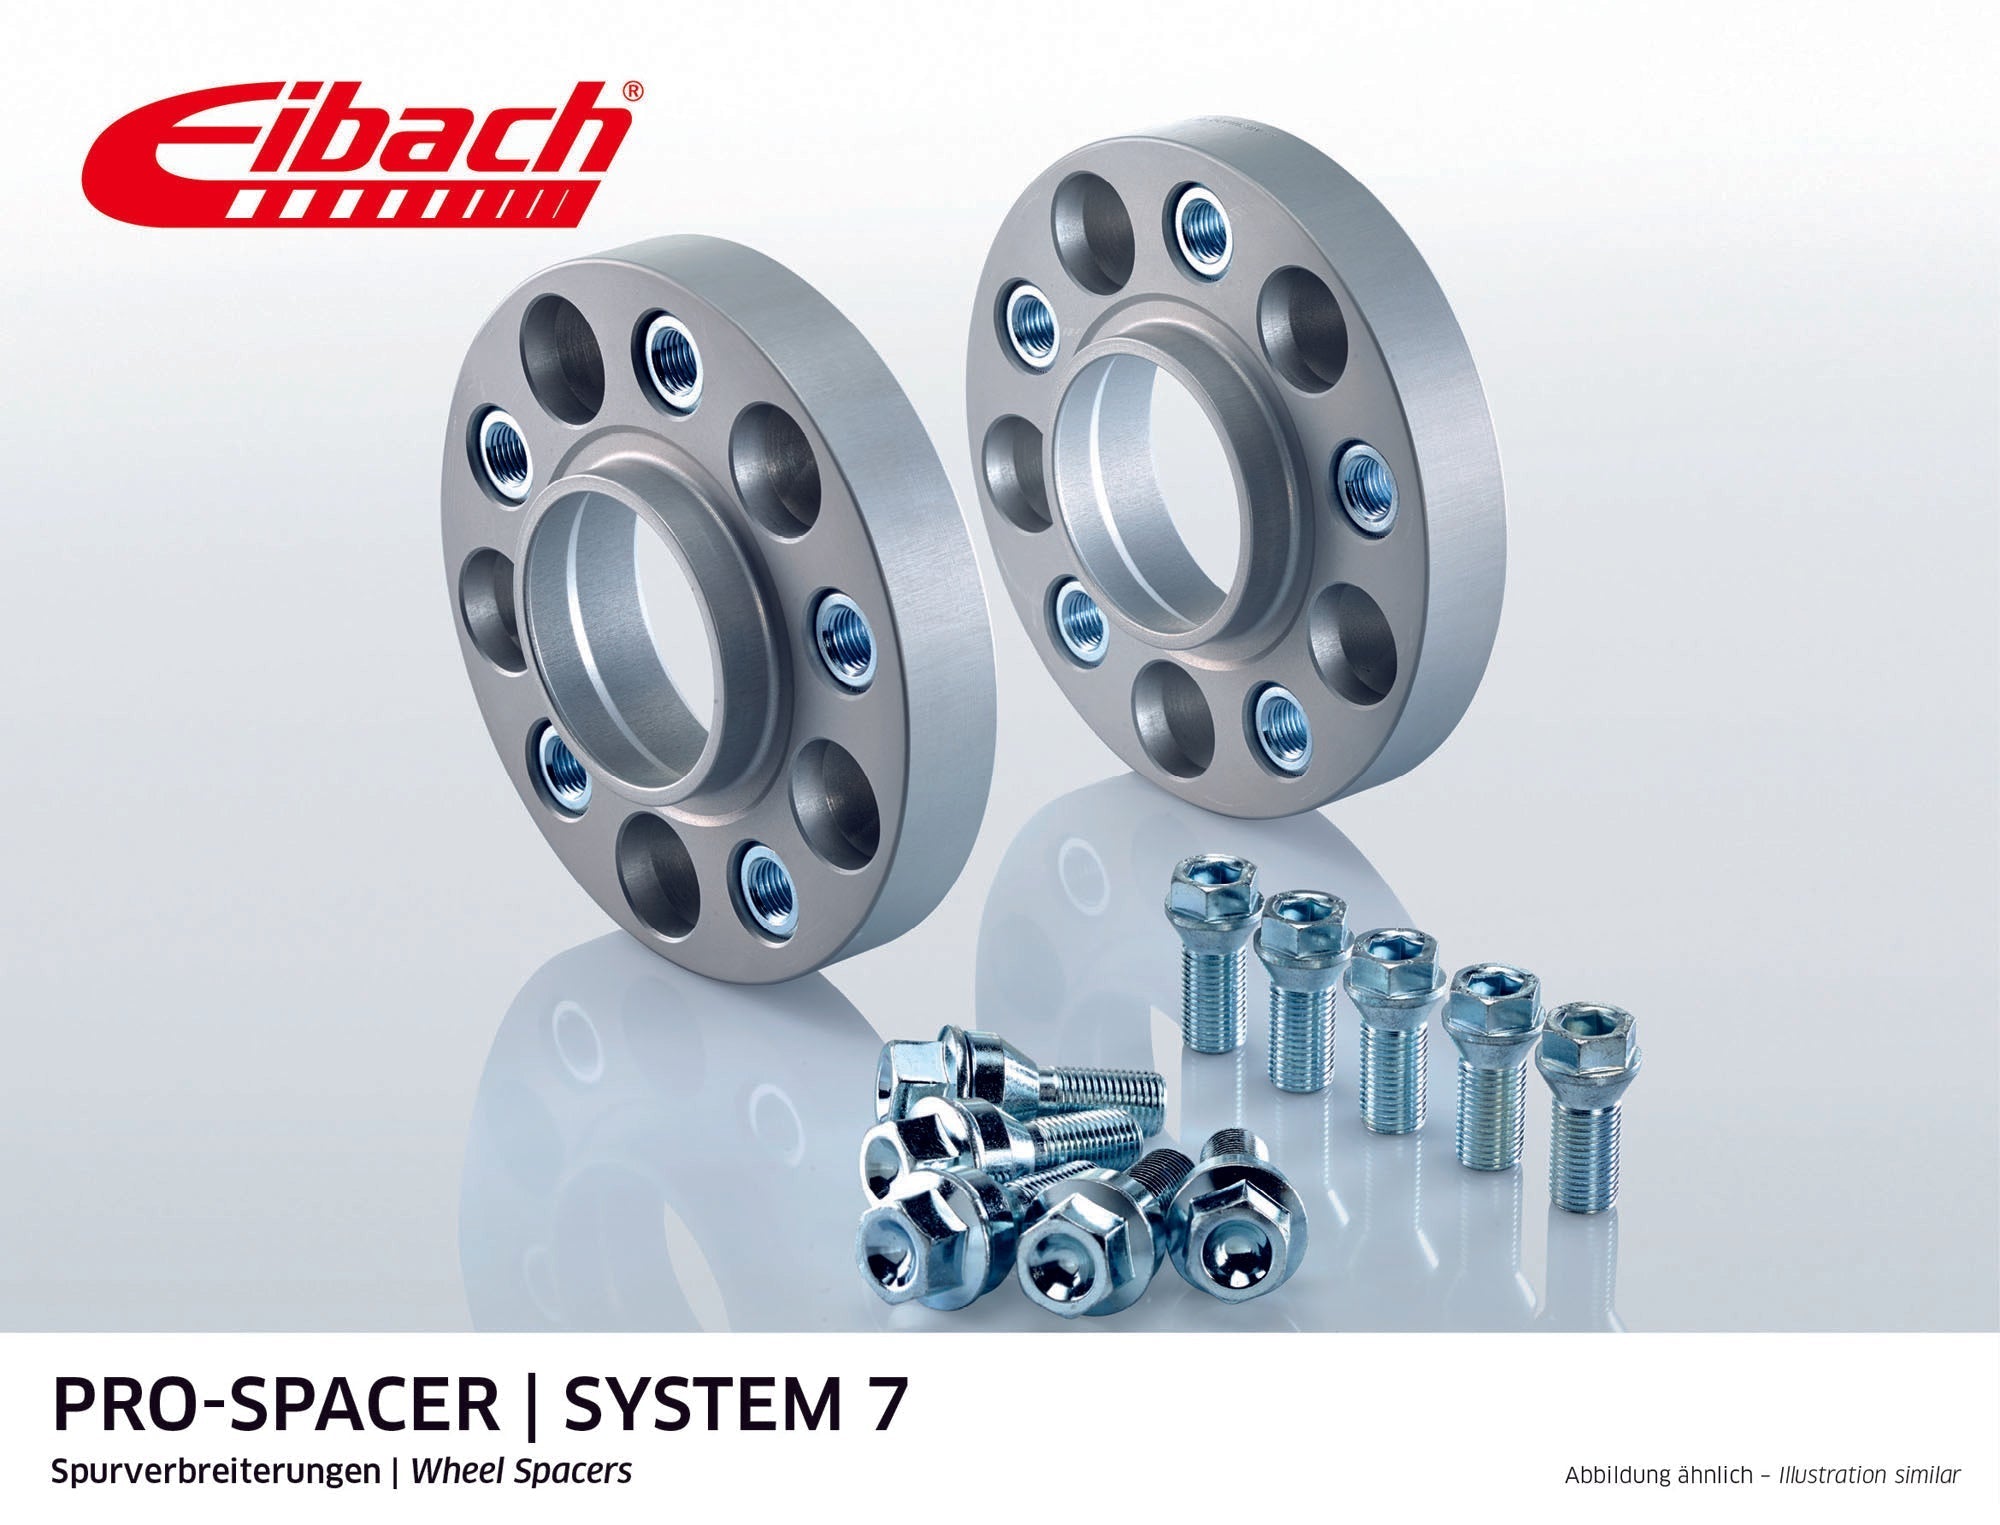 Eibach 23mm Pro-Spacer - Silver Anodized Wheel Spacer PANAMERA 2009-on #S90-7-23-001